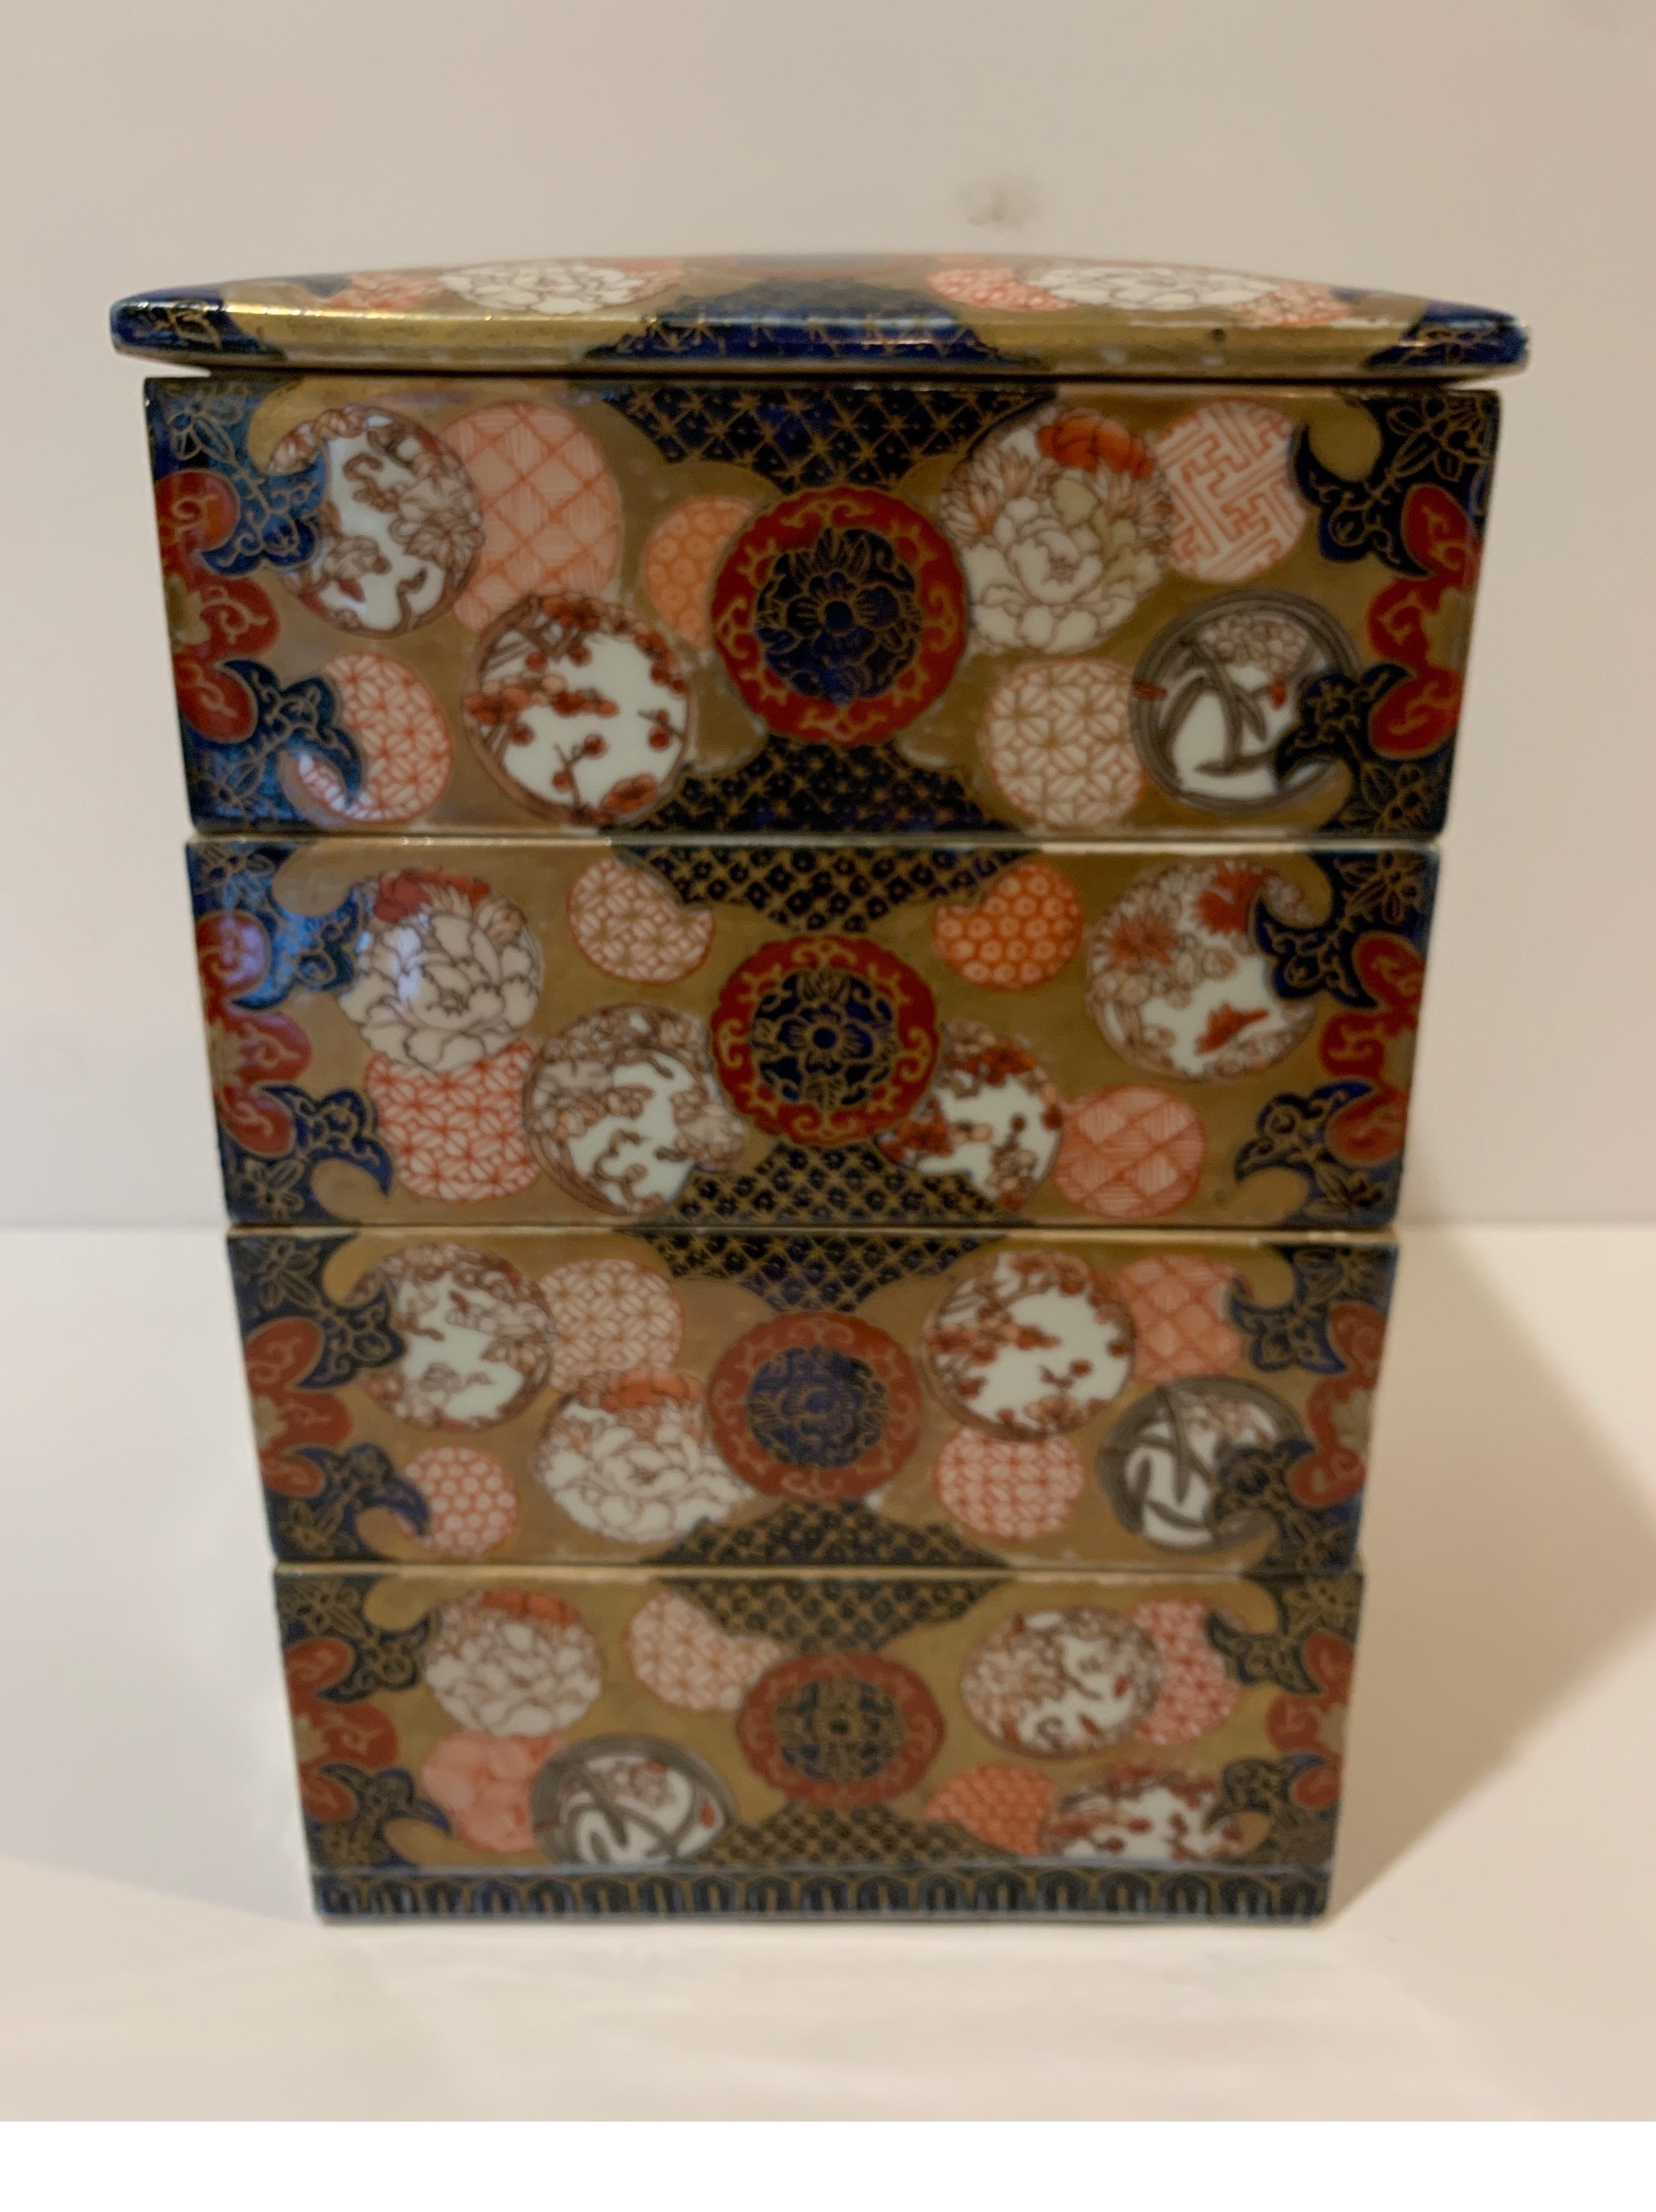 Unusual Japanese porcelain stack box vessel. The set of four boxes with top lid exquisitely painted in the Classic Imari iron red and cobalt blue with all-over gilt decoration. Finest imperial quality.